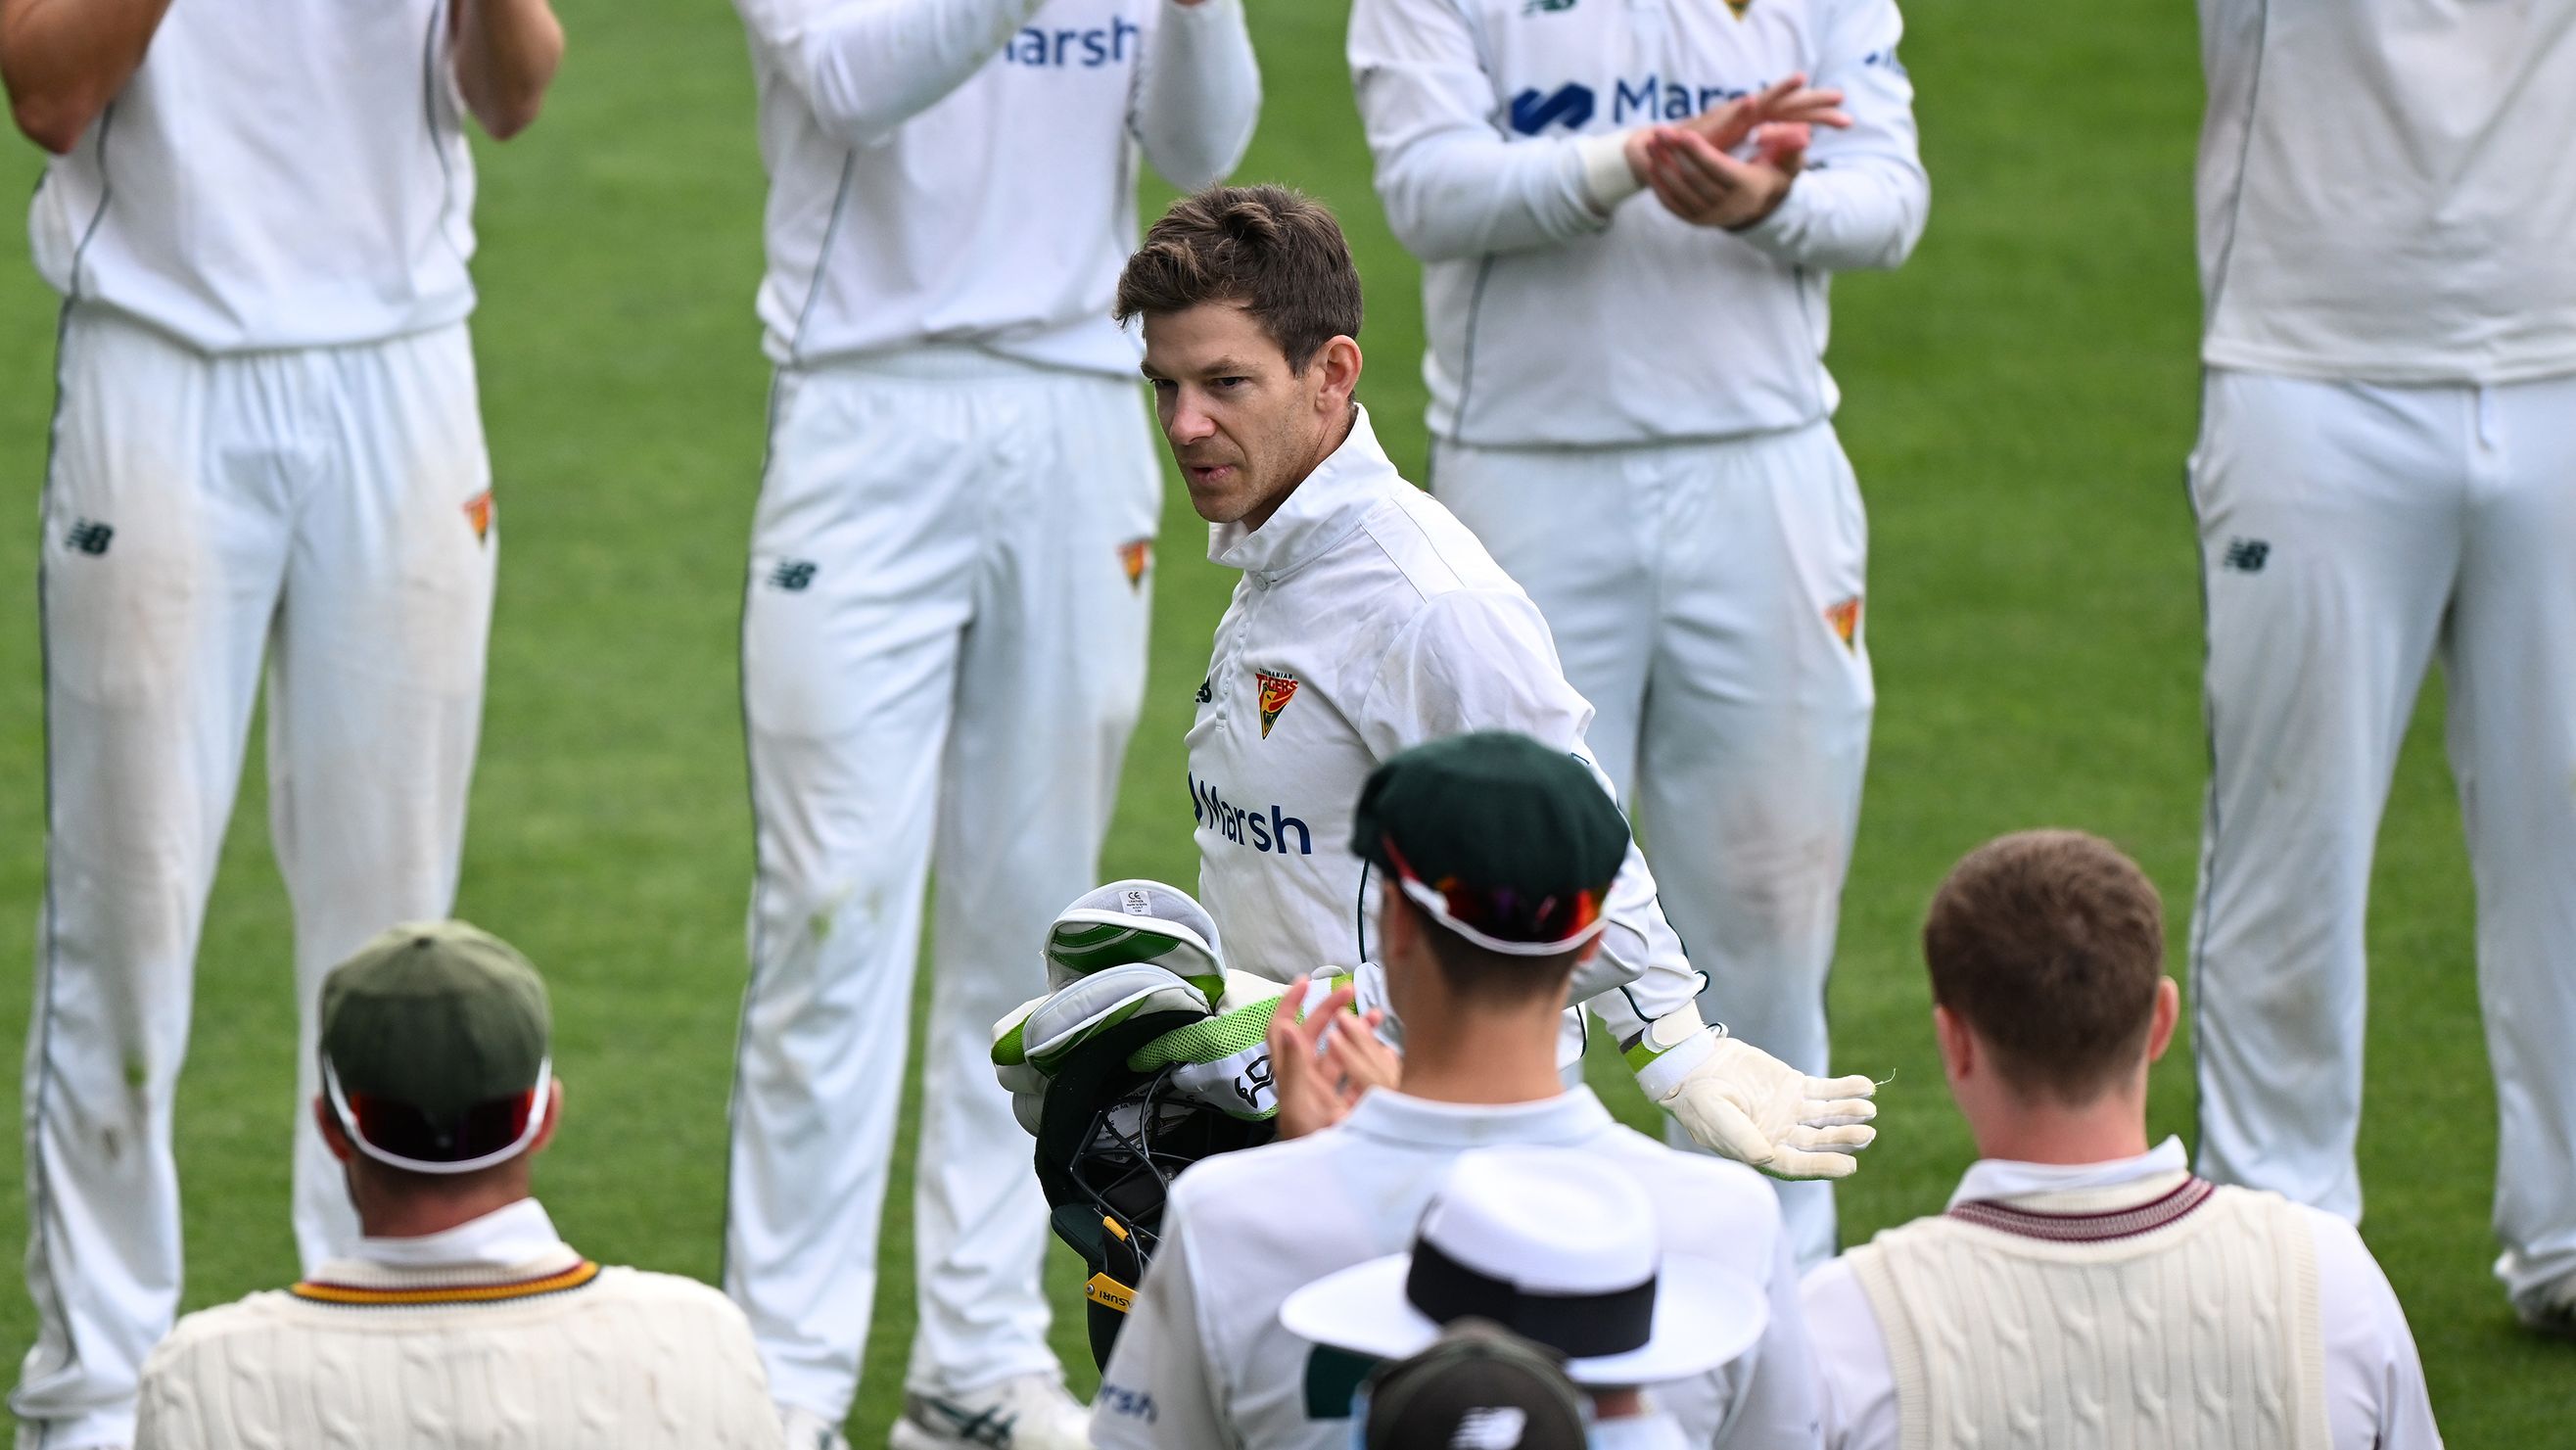 Tim Paine is acknowledged by players as he leaves the field during the Sheffield Shield match between Tasmania and Queensland.